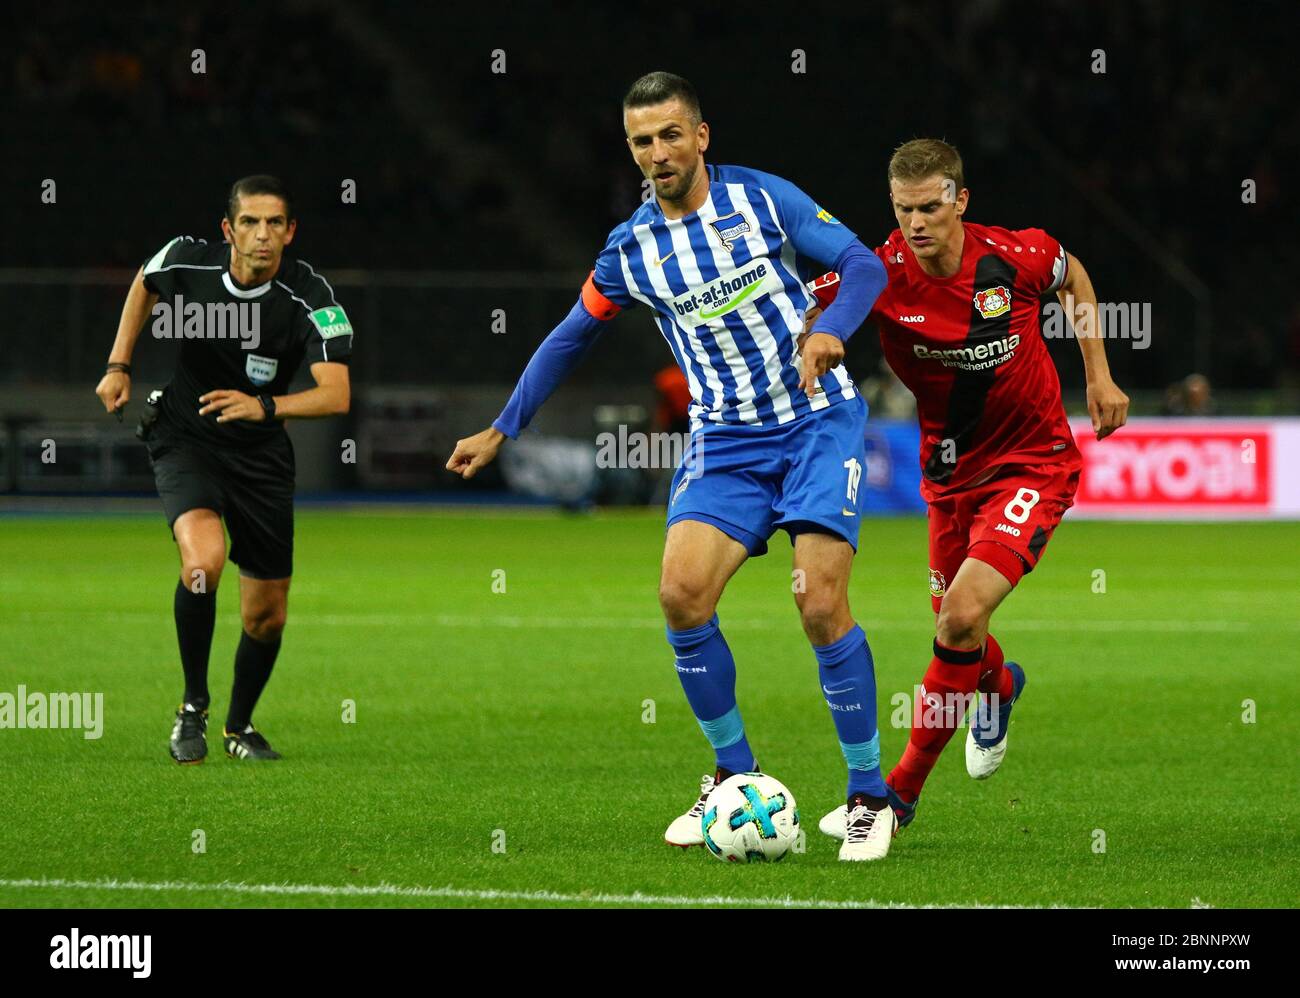 Berlin, Germany - September 20, 2017: Vedad Ibisevic of Hertha BSC Berlin (L) fights for a ball with Lars Bender of Bayer 04 Leverkusen during their German Bundesliga game at Olympiastadion Berlin Stock Photo